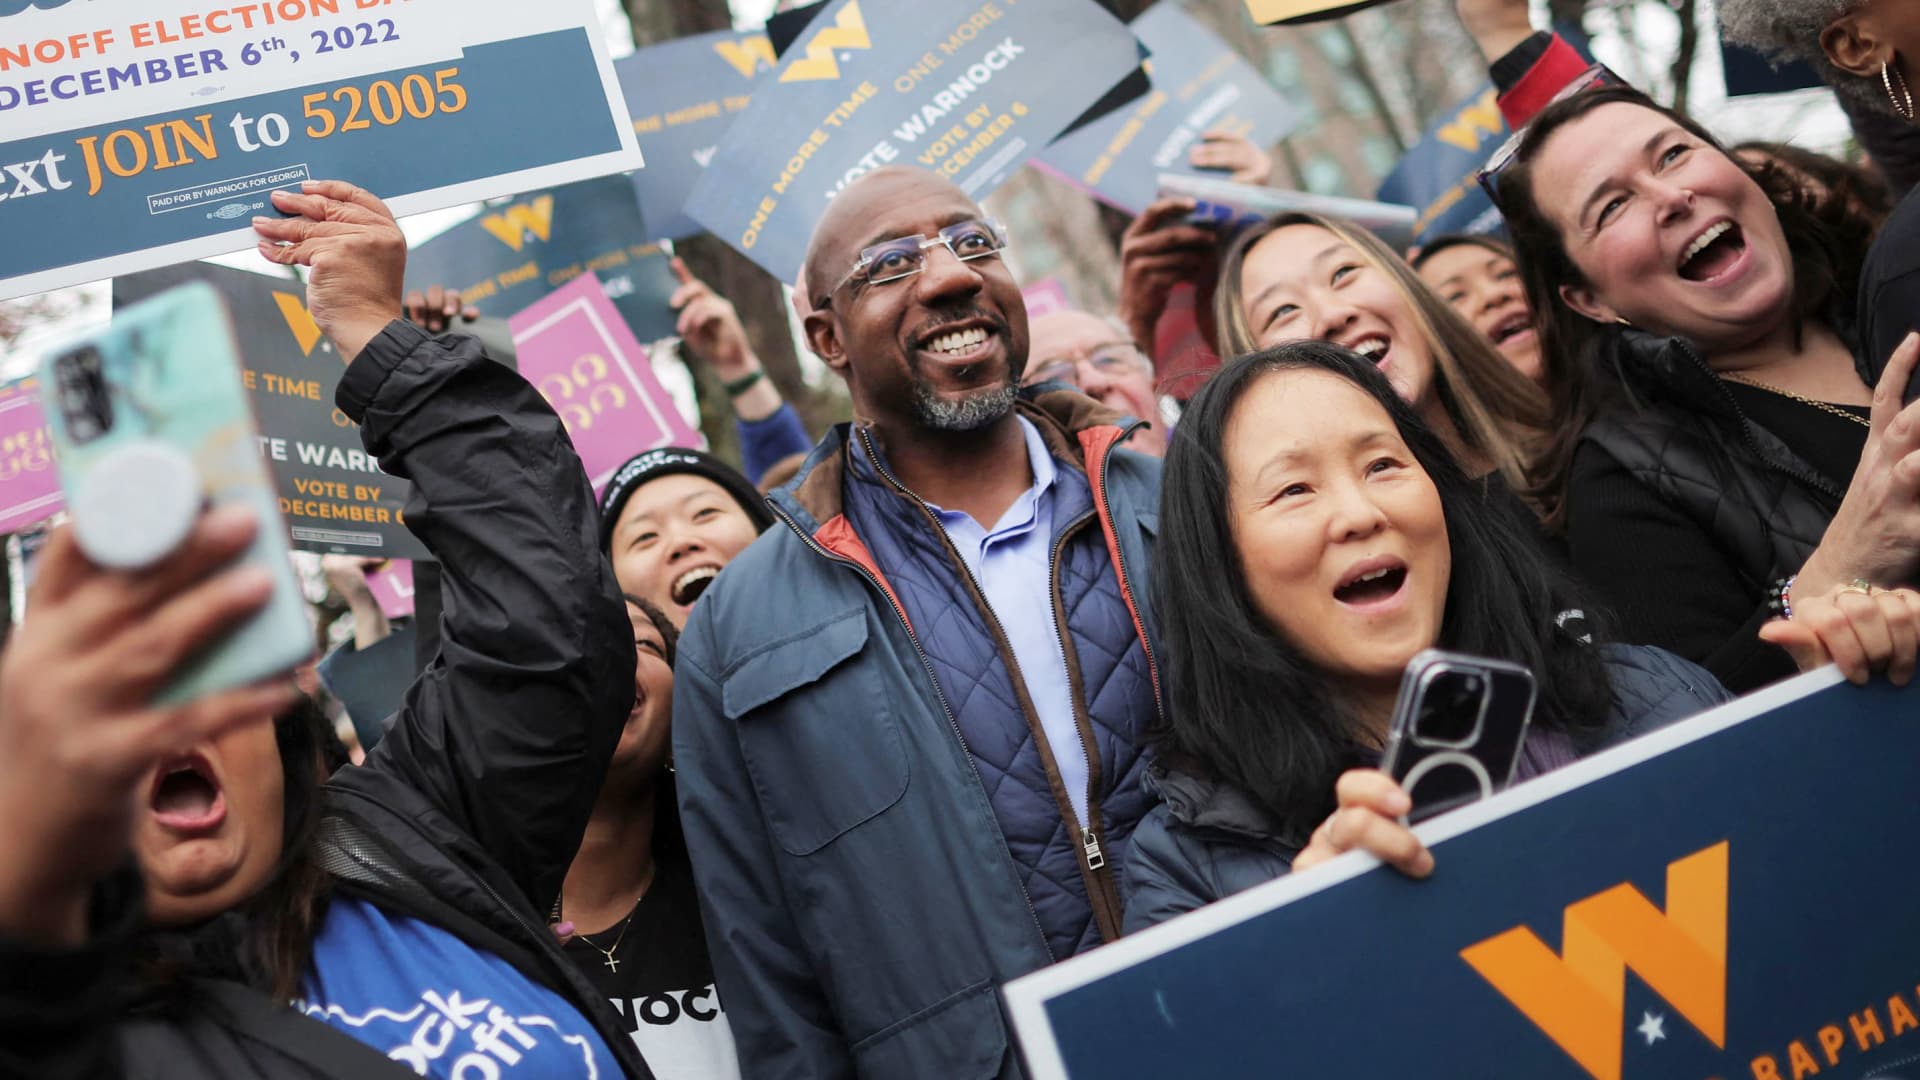 Reverend Raphael Warnock, Democratic Senator for Georgia, gather with supporters during the midterm Senate runoff elections in Norcross, Georgia, December 6, 2022.